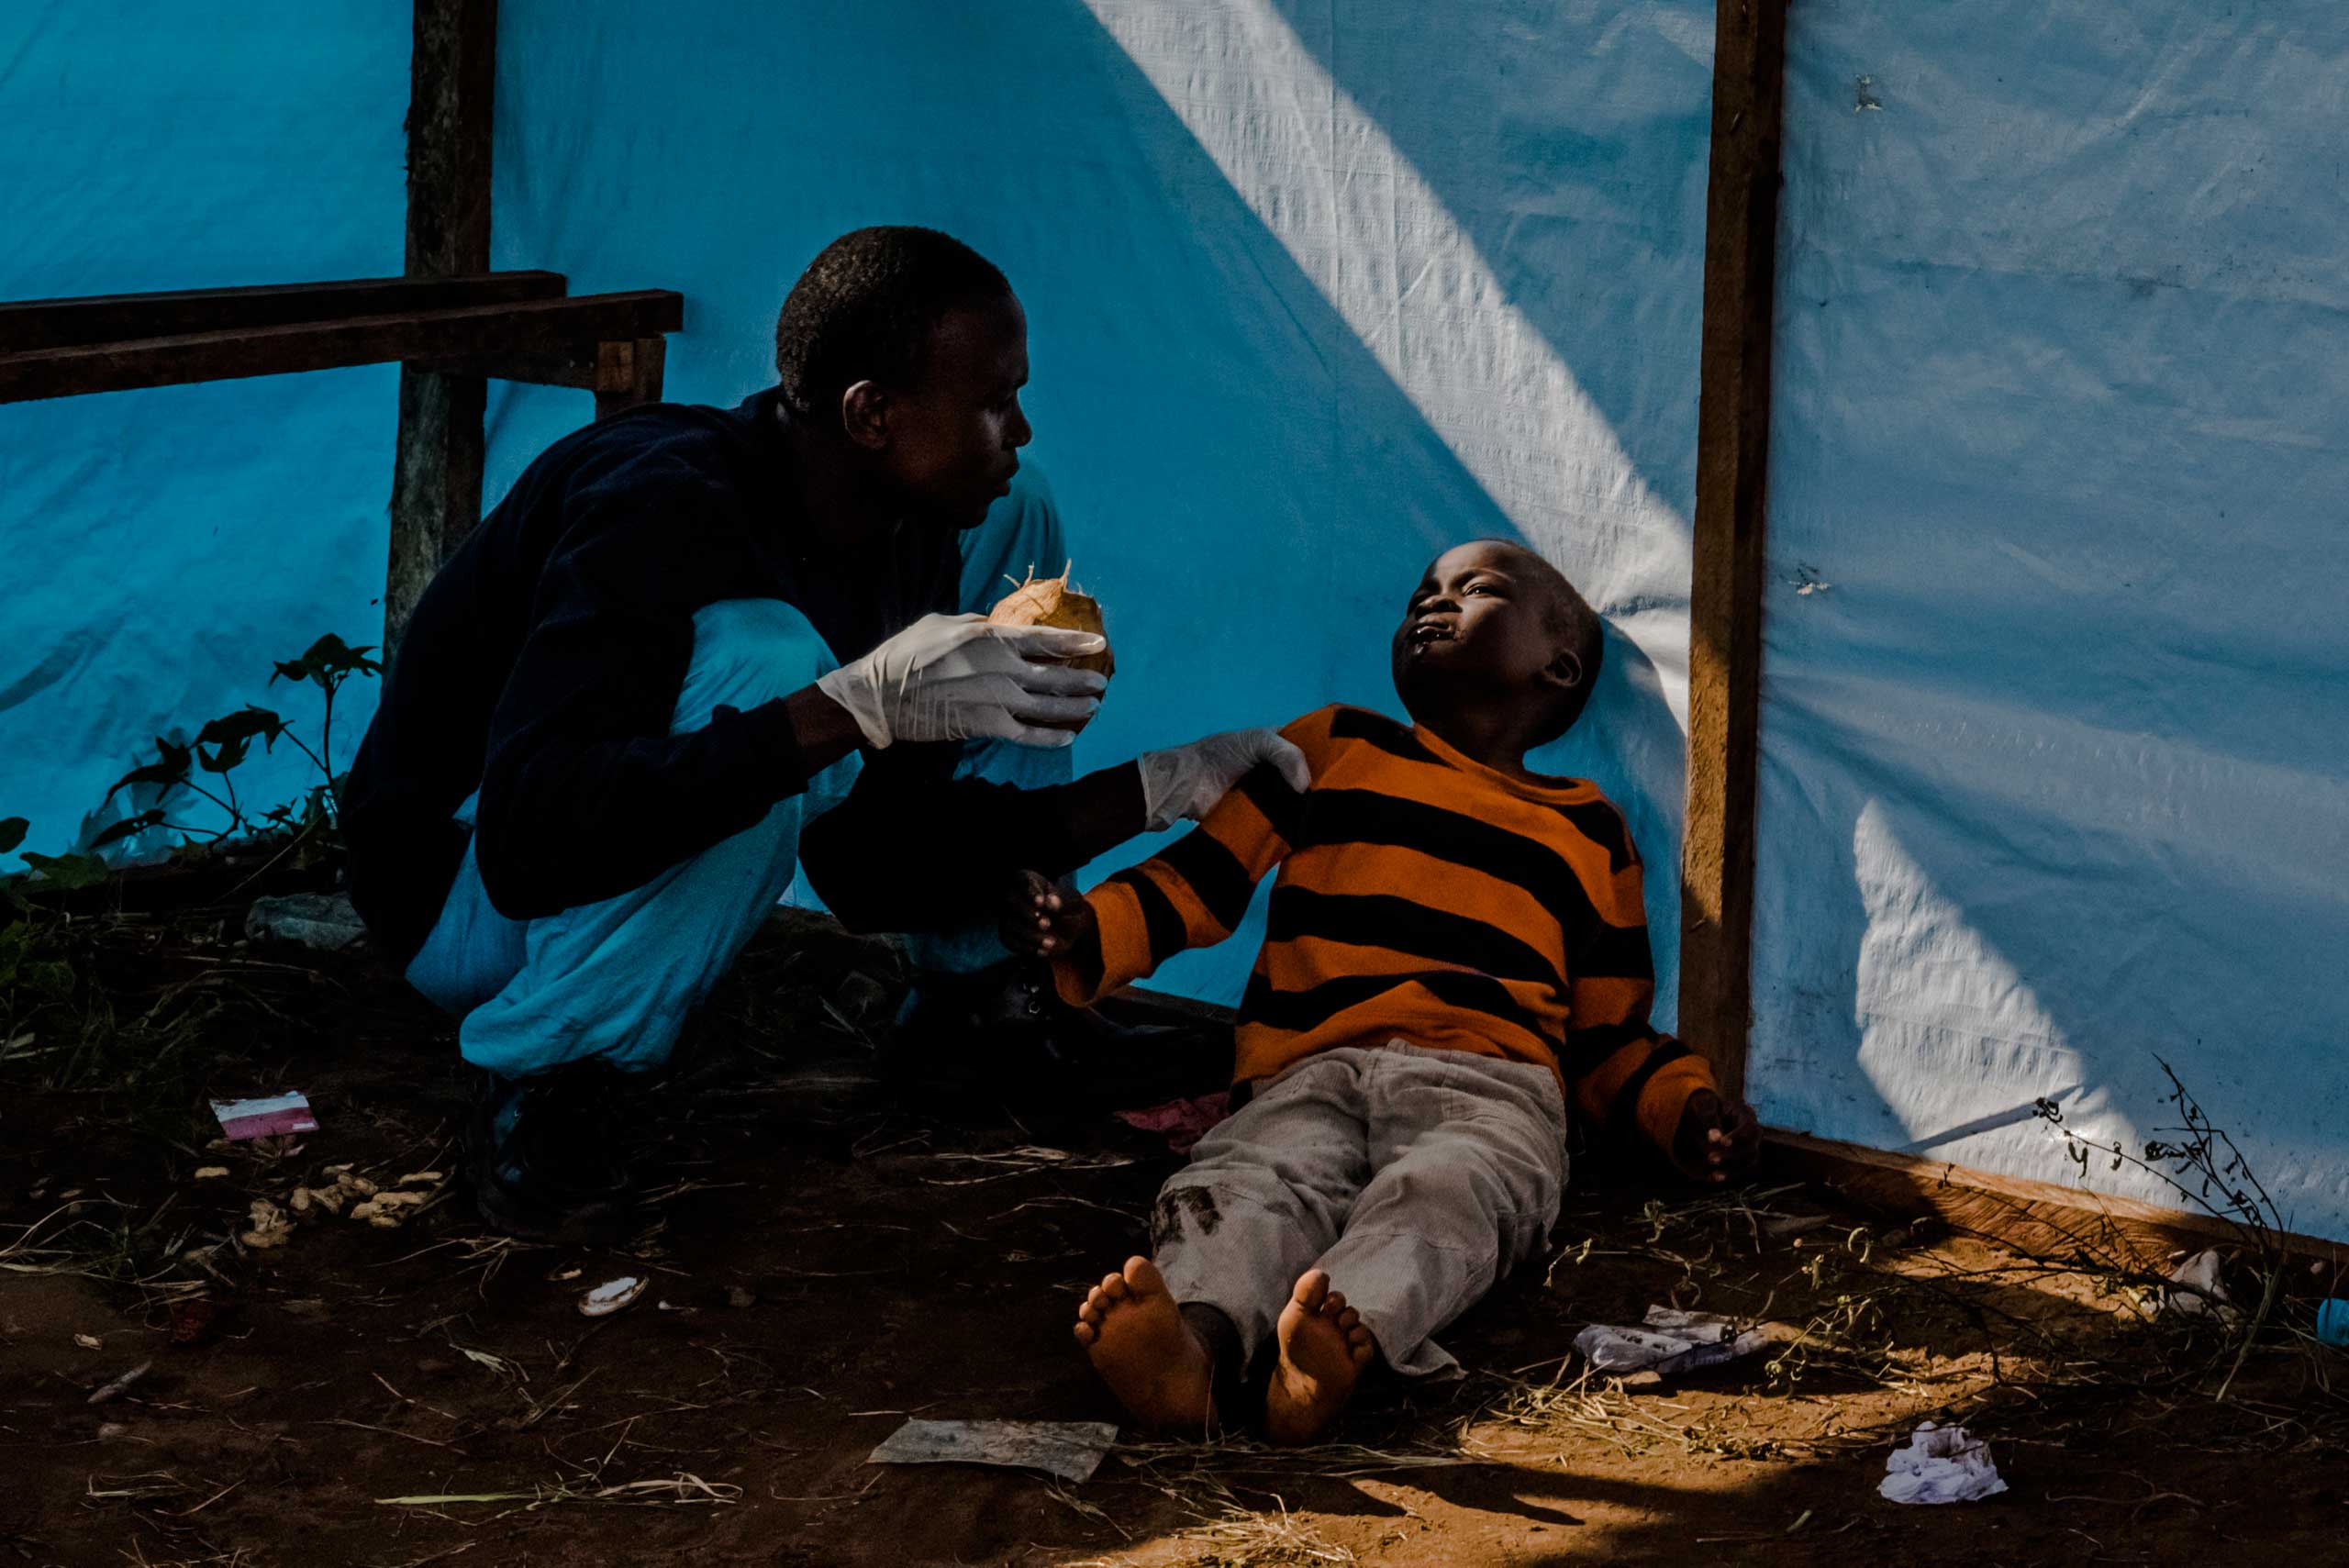 James Dorbor, 8, suspected to have Ebola, lays on the ground as his father Edward tried to get the boy to drink coconut water. They waited for James to be admitted into the JFK Ebola treatment center on Sept. 5, 2014 in Monrovia, Liberia.